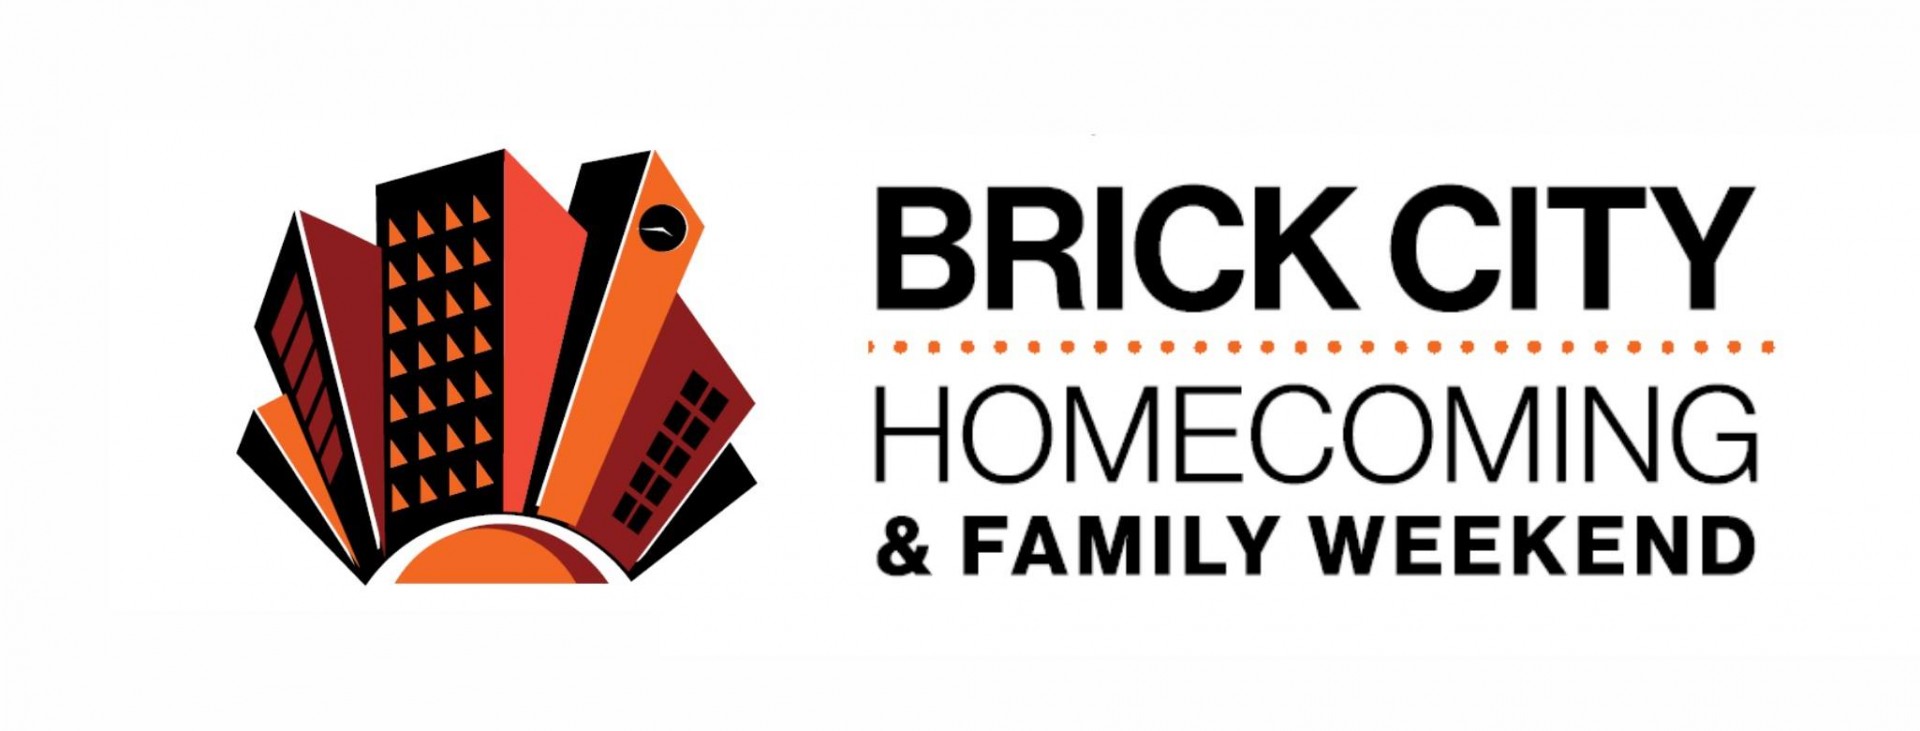 Brick City Homecoming & family weekend